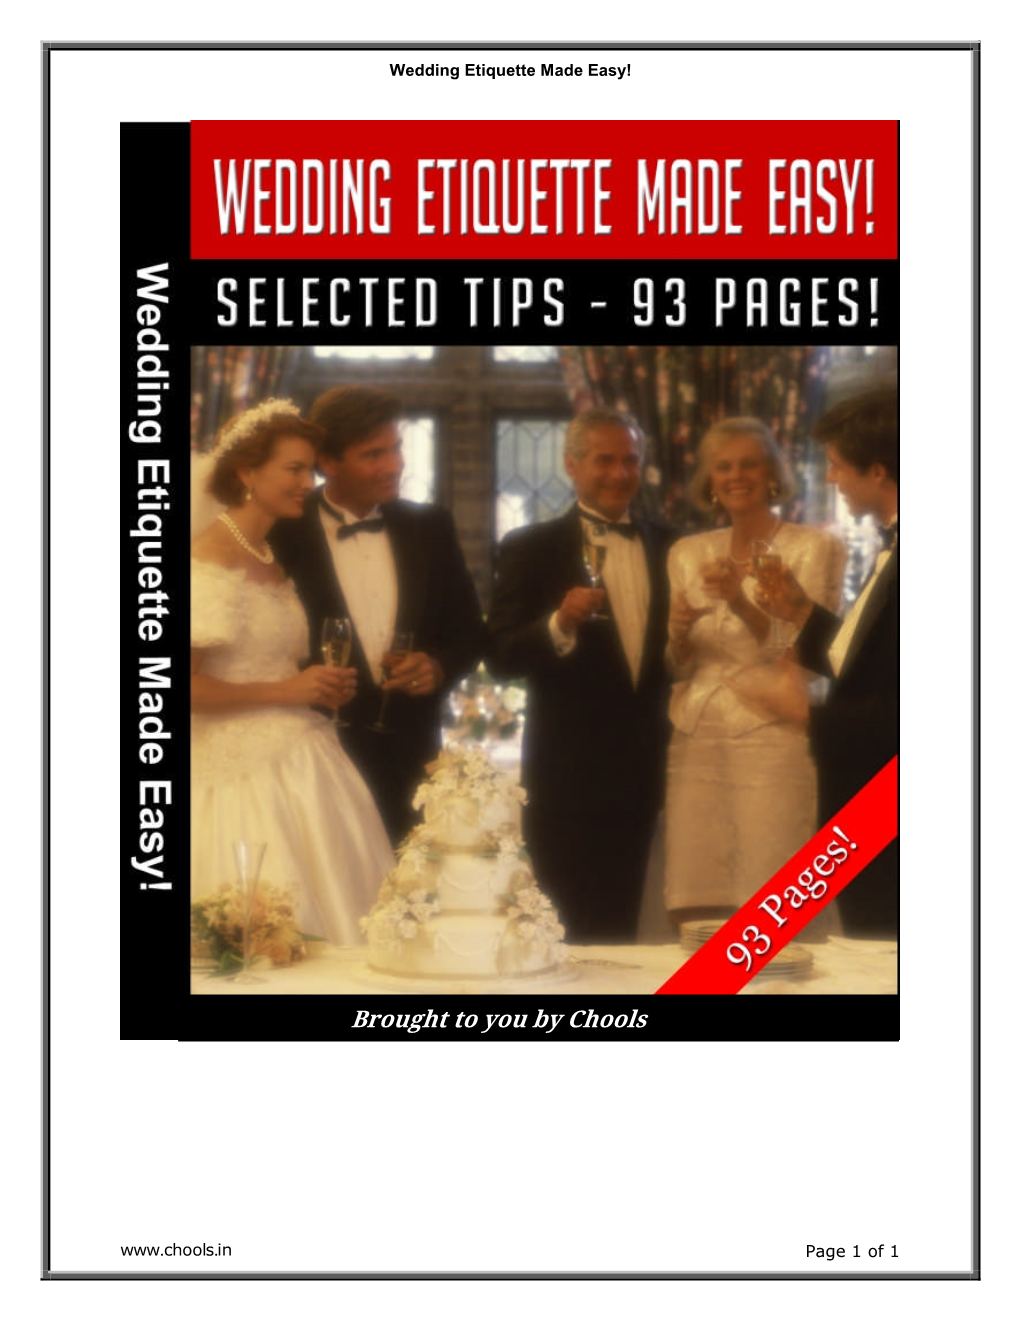 Miss Manners on Wedding Etiquette for Brides